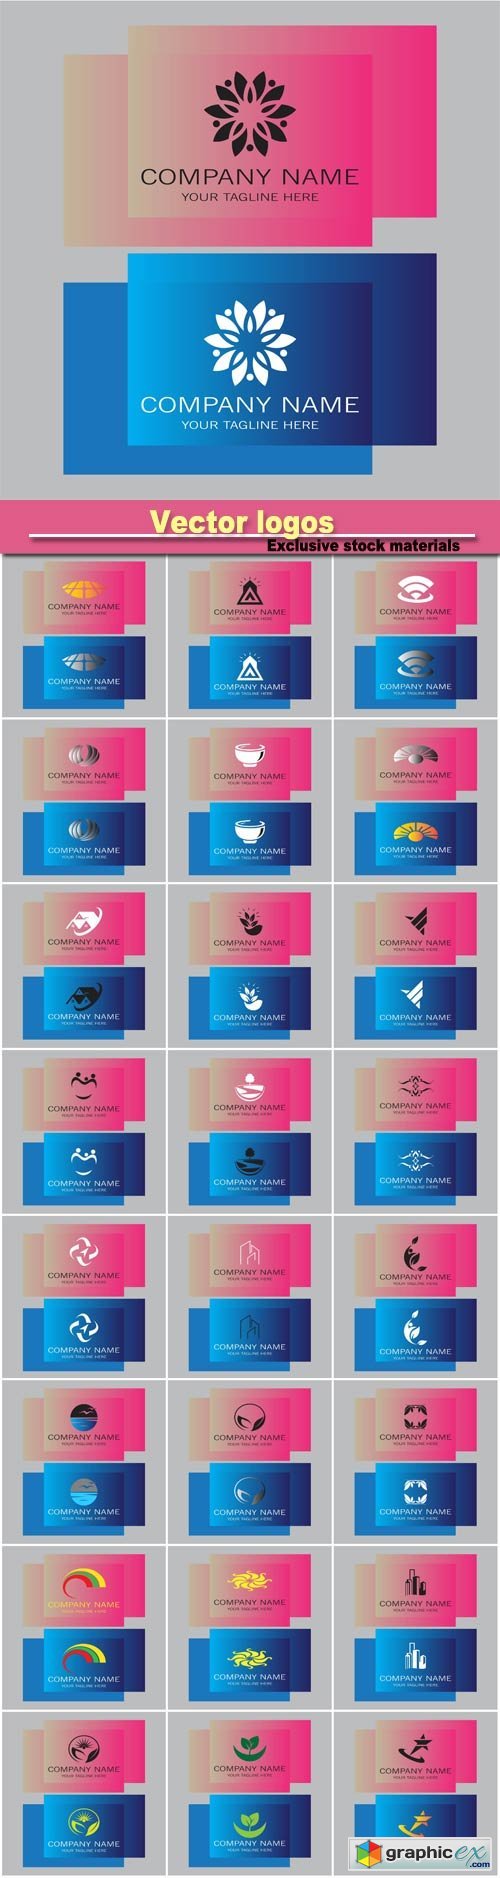 Business logos on the pink and blue backgrounds